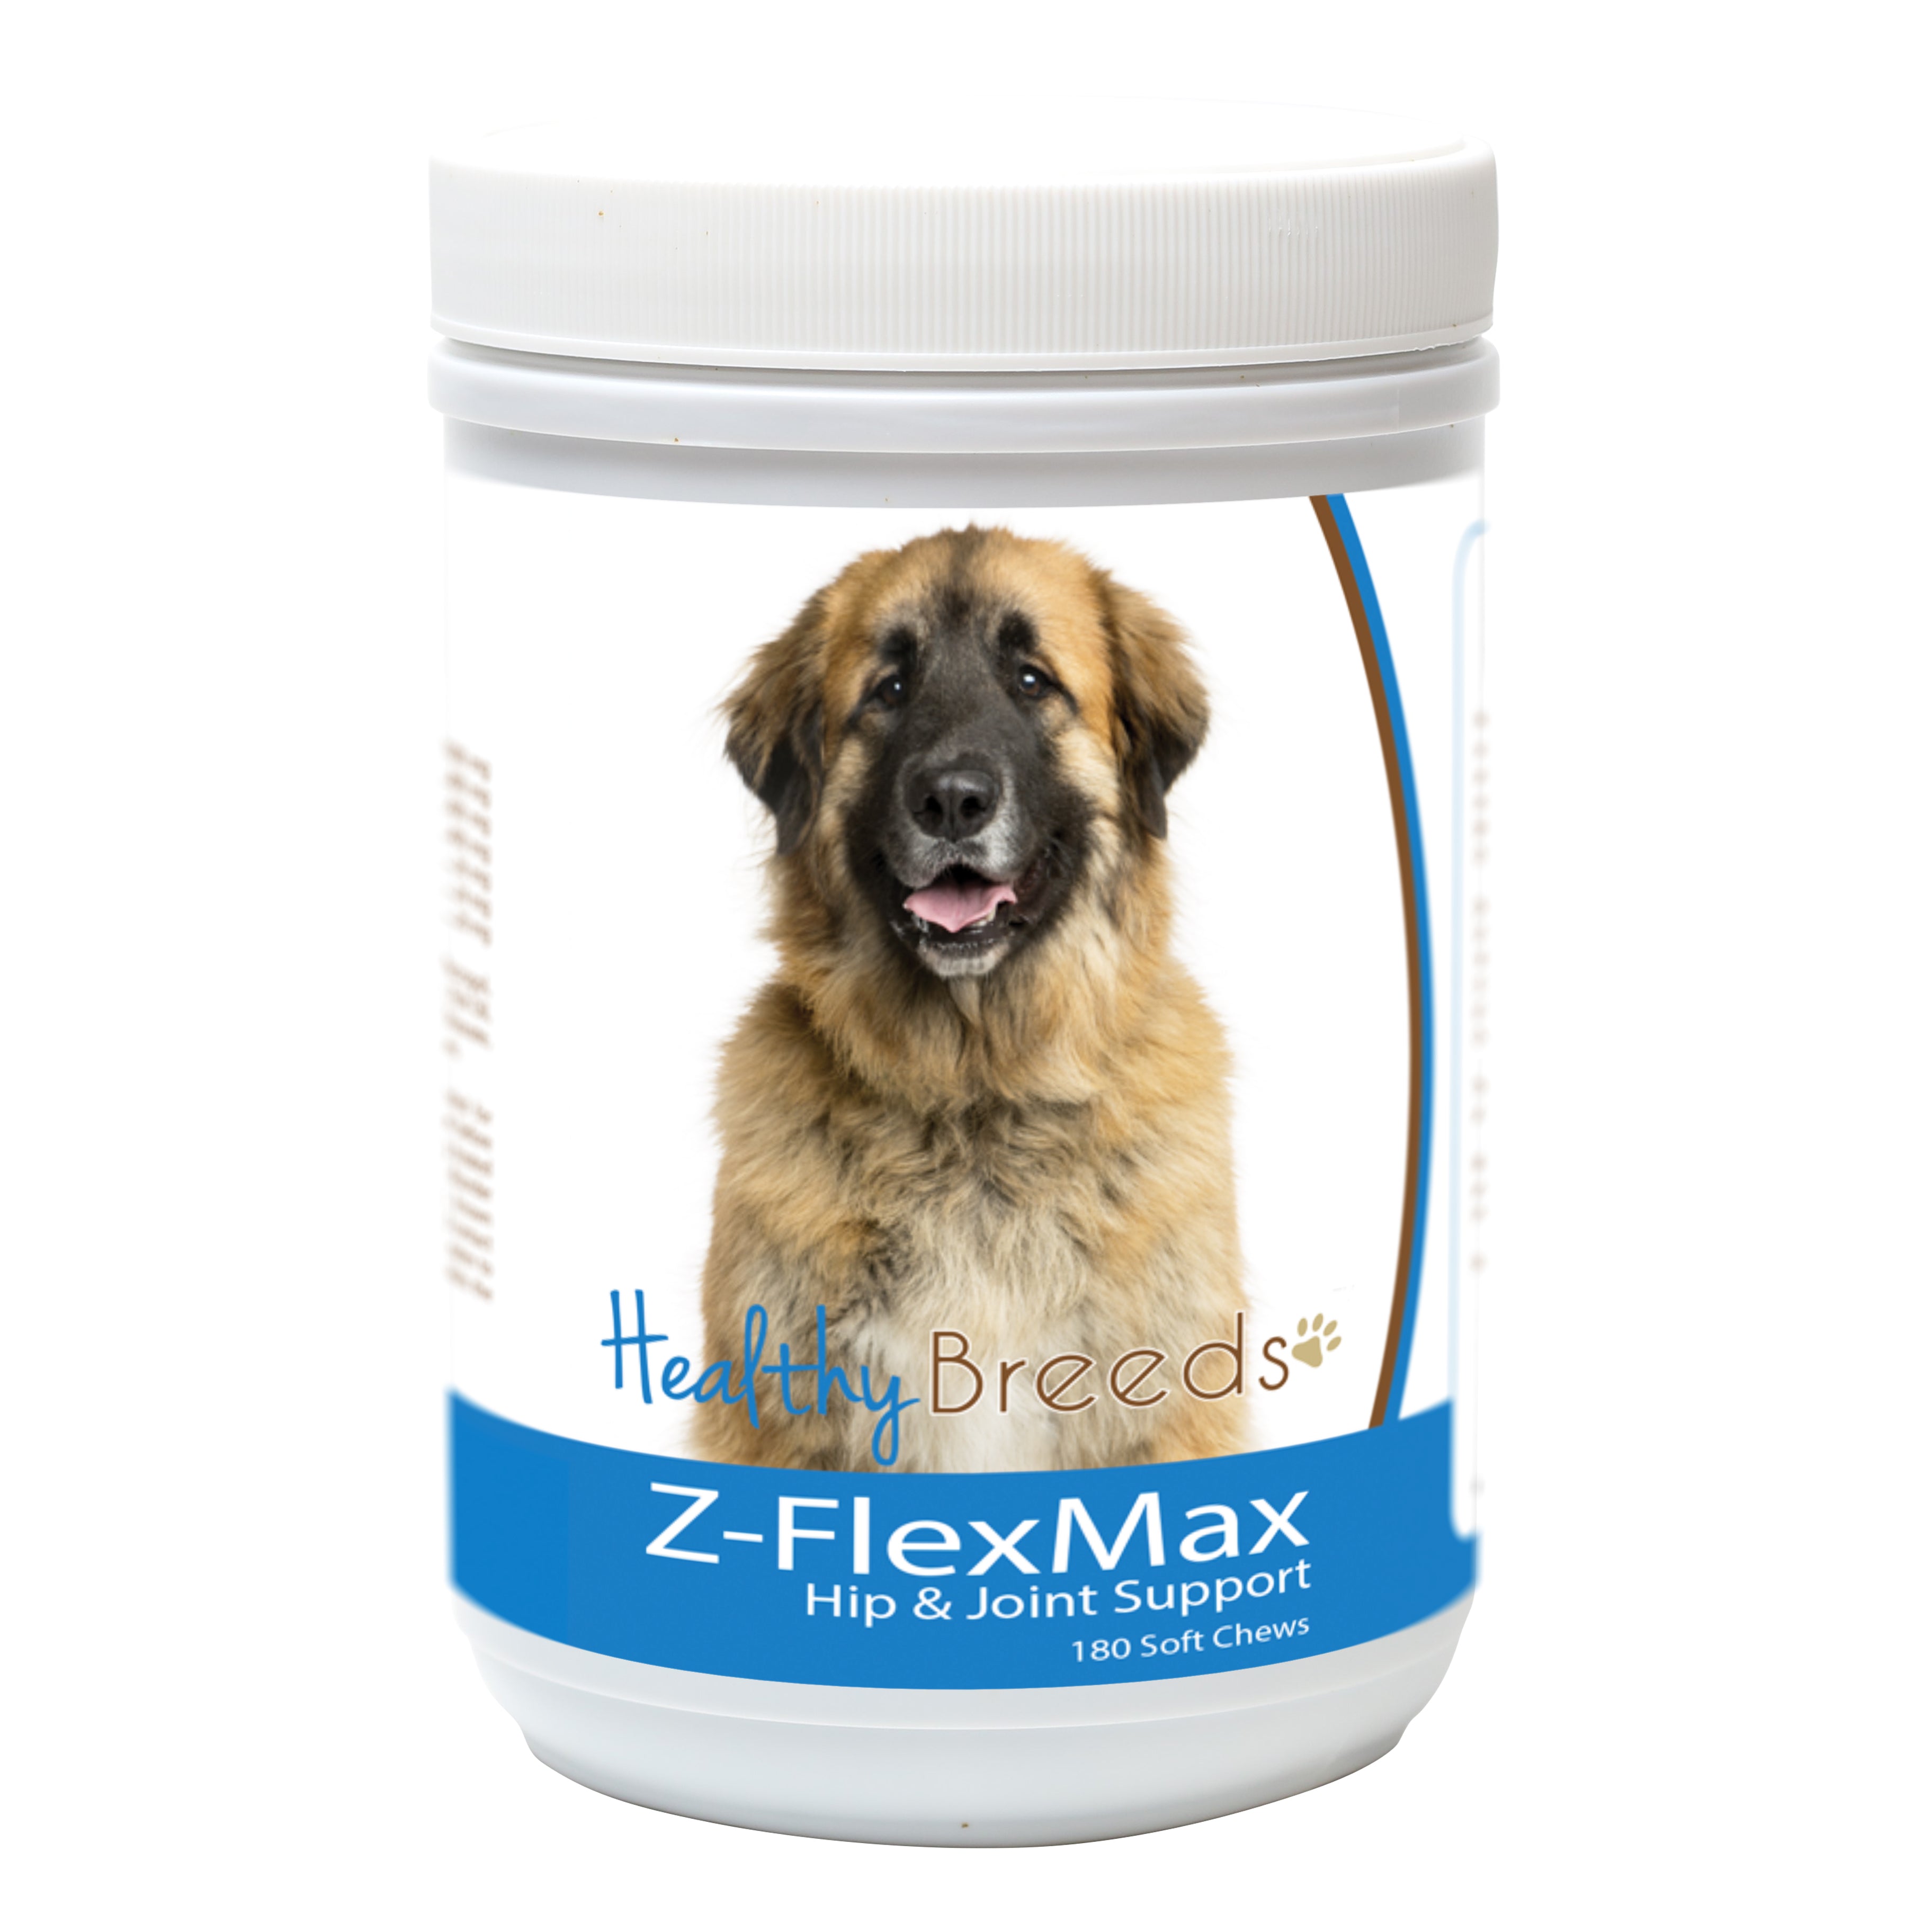 Leonberger Z-Flex Max Dog Hip and Joint Support 180 Count